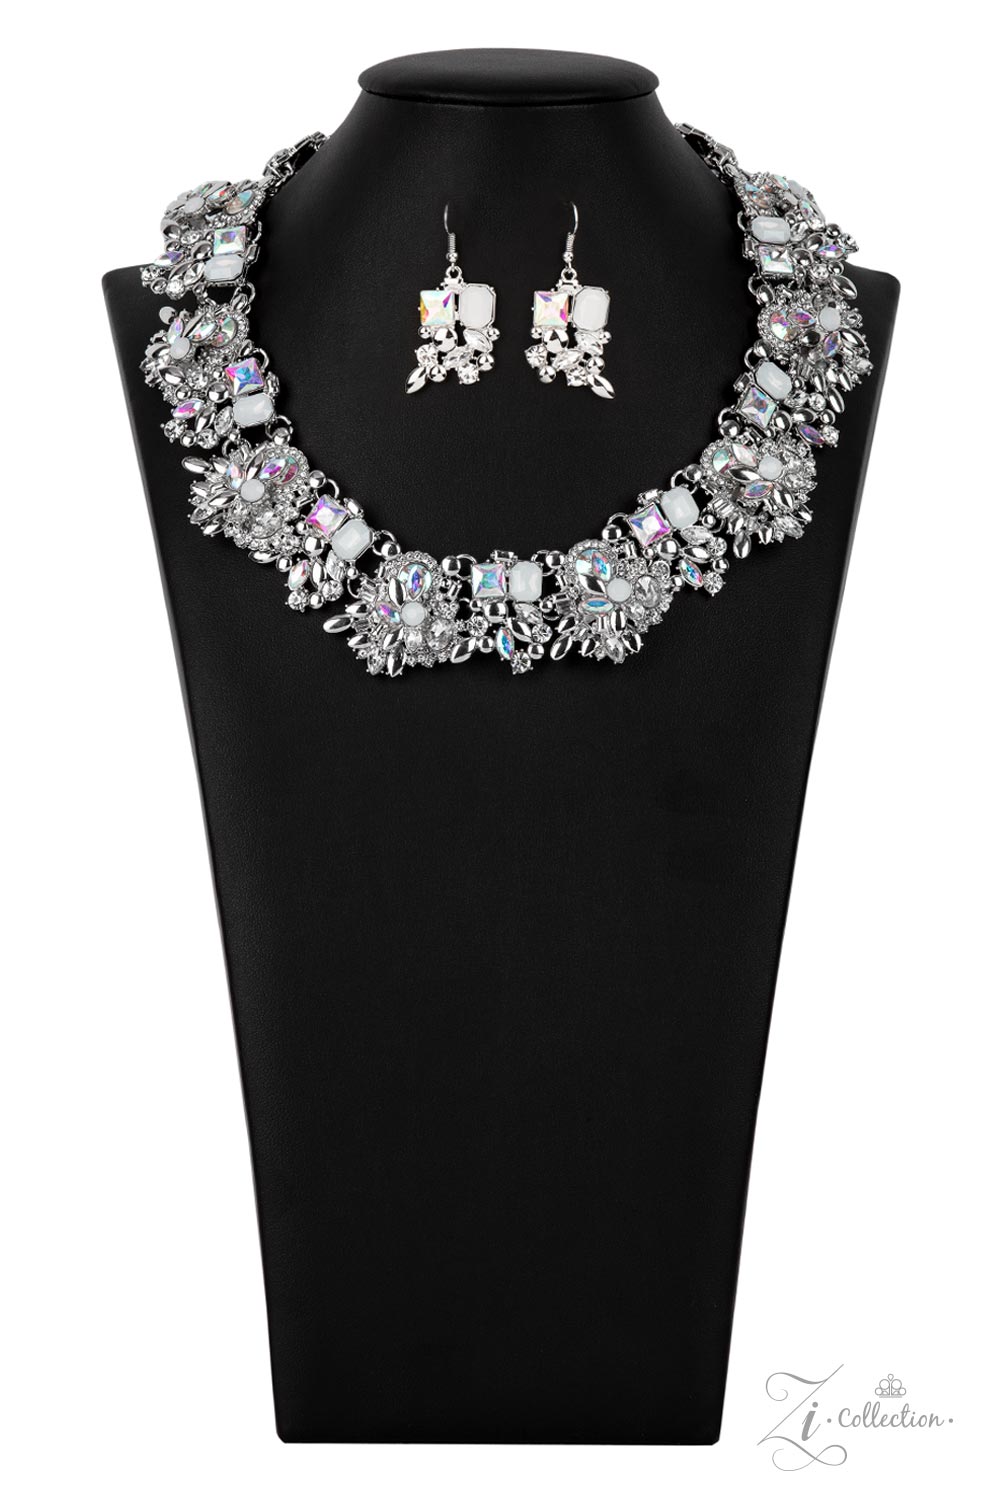 Exceptional - Paparazzi Zi Collection necklace